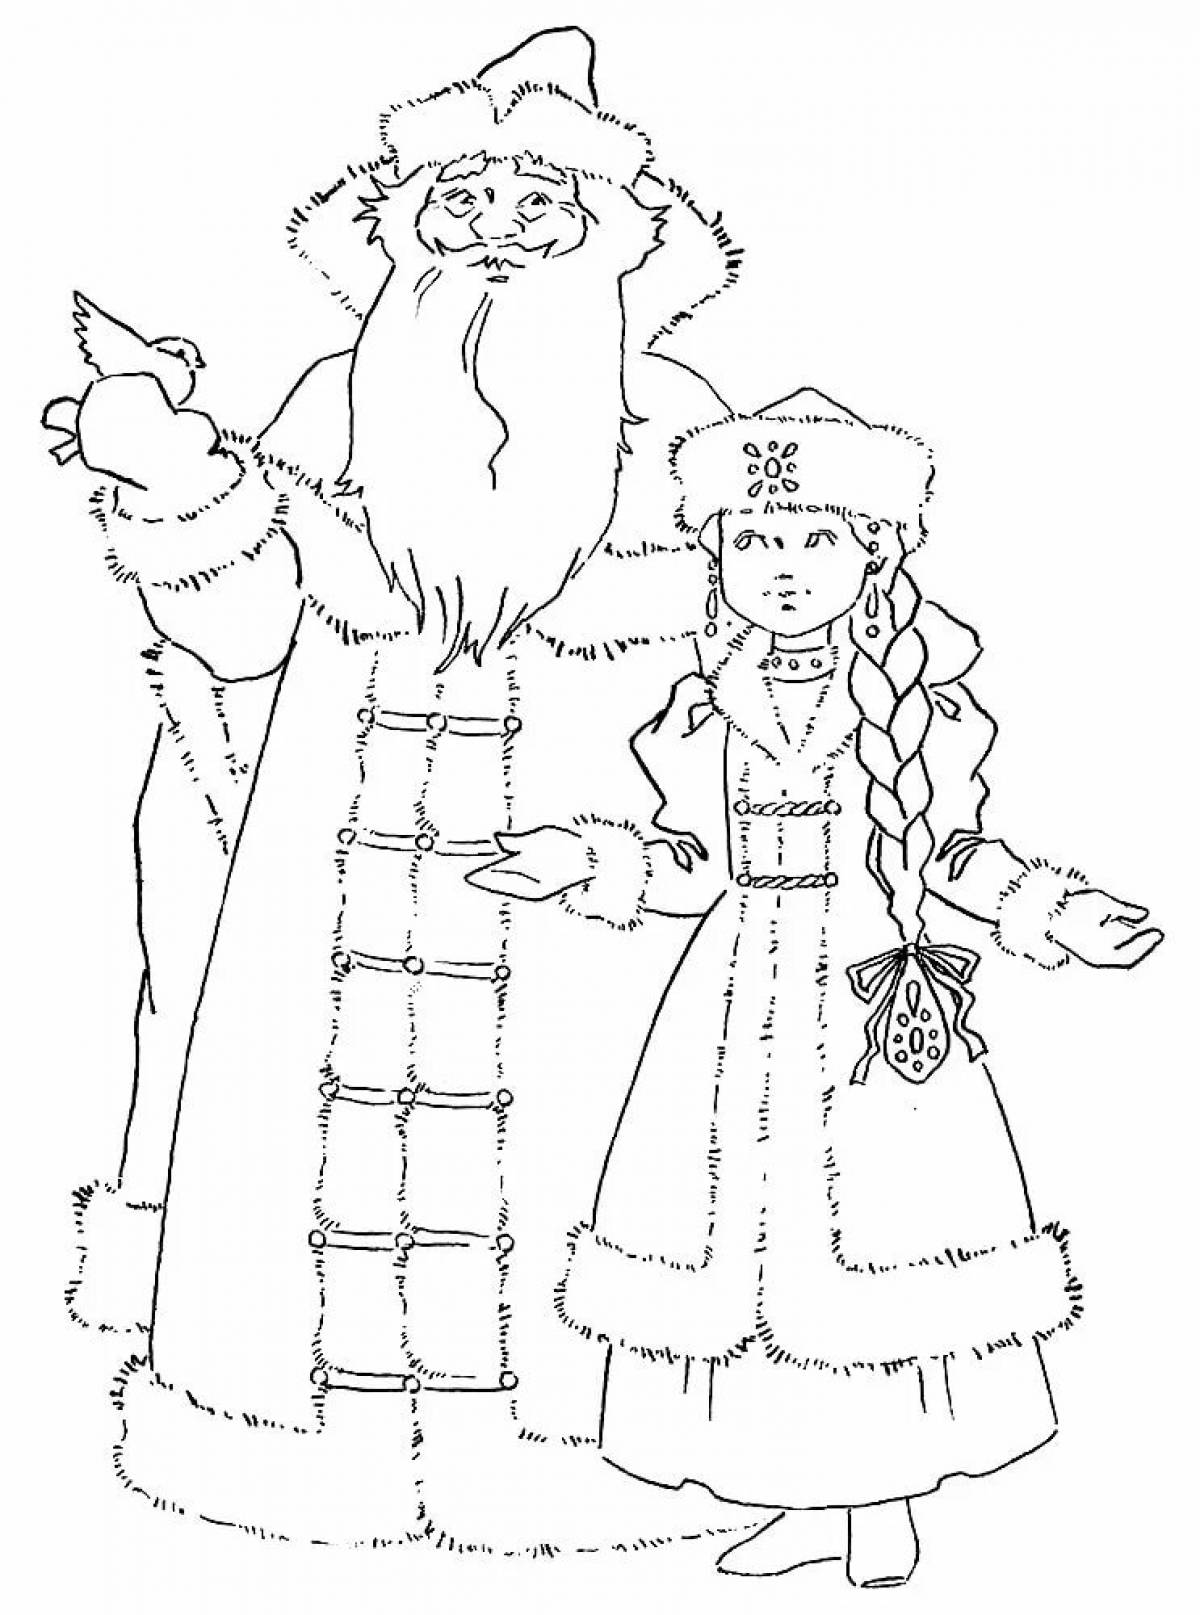 Santa Claus and Snow Maiden drawing #2